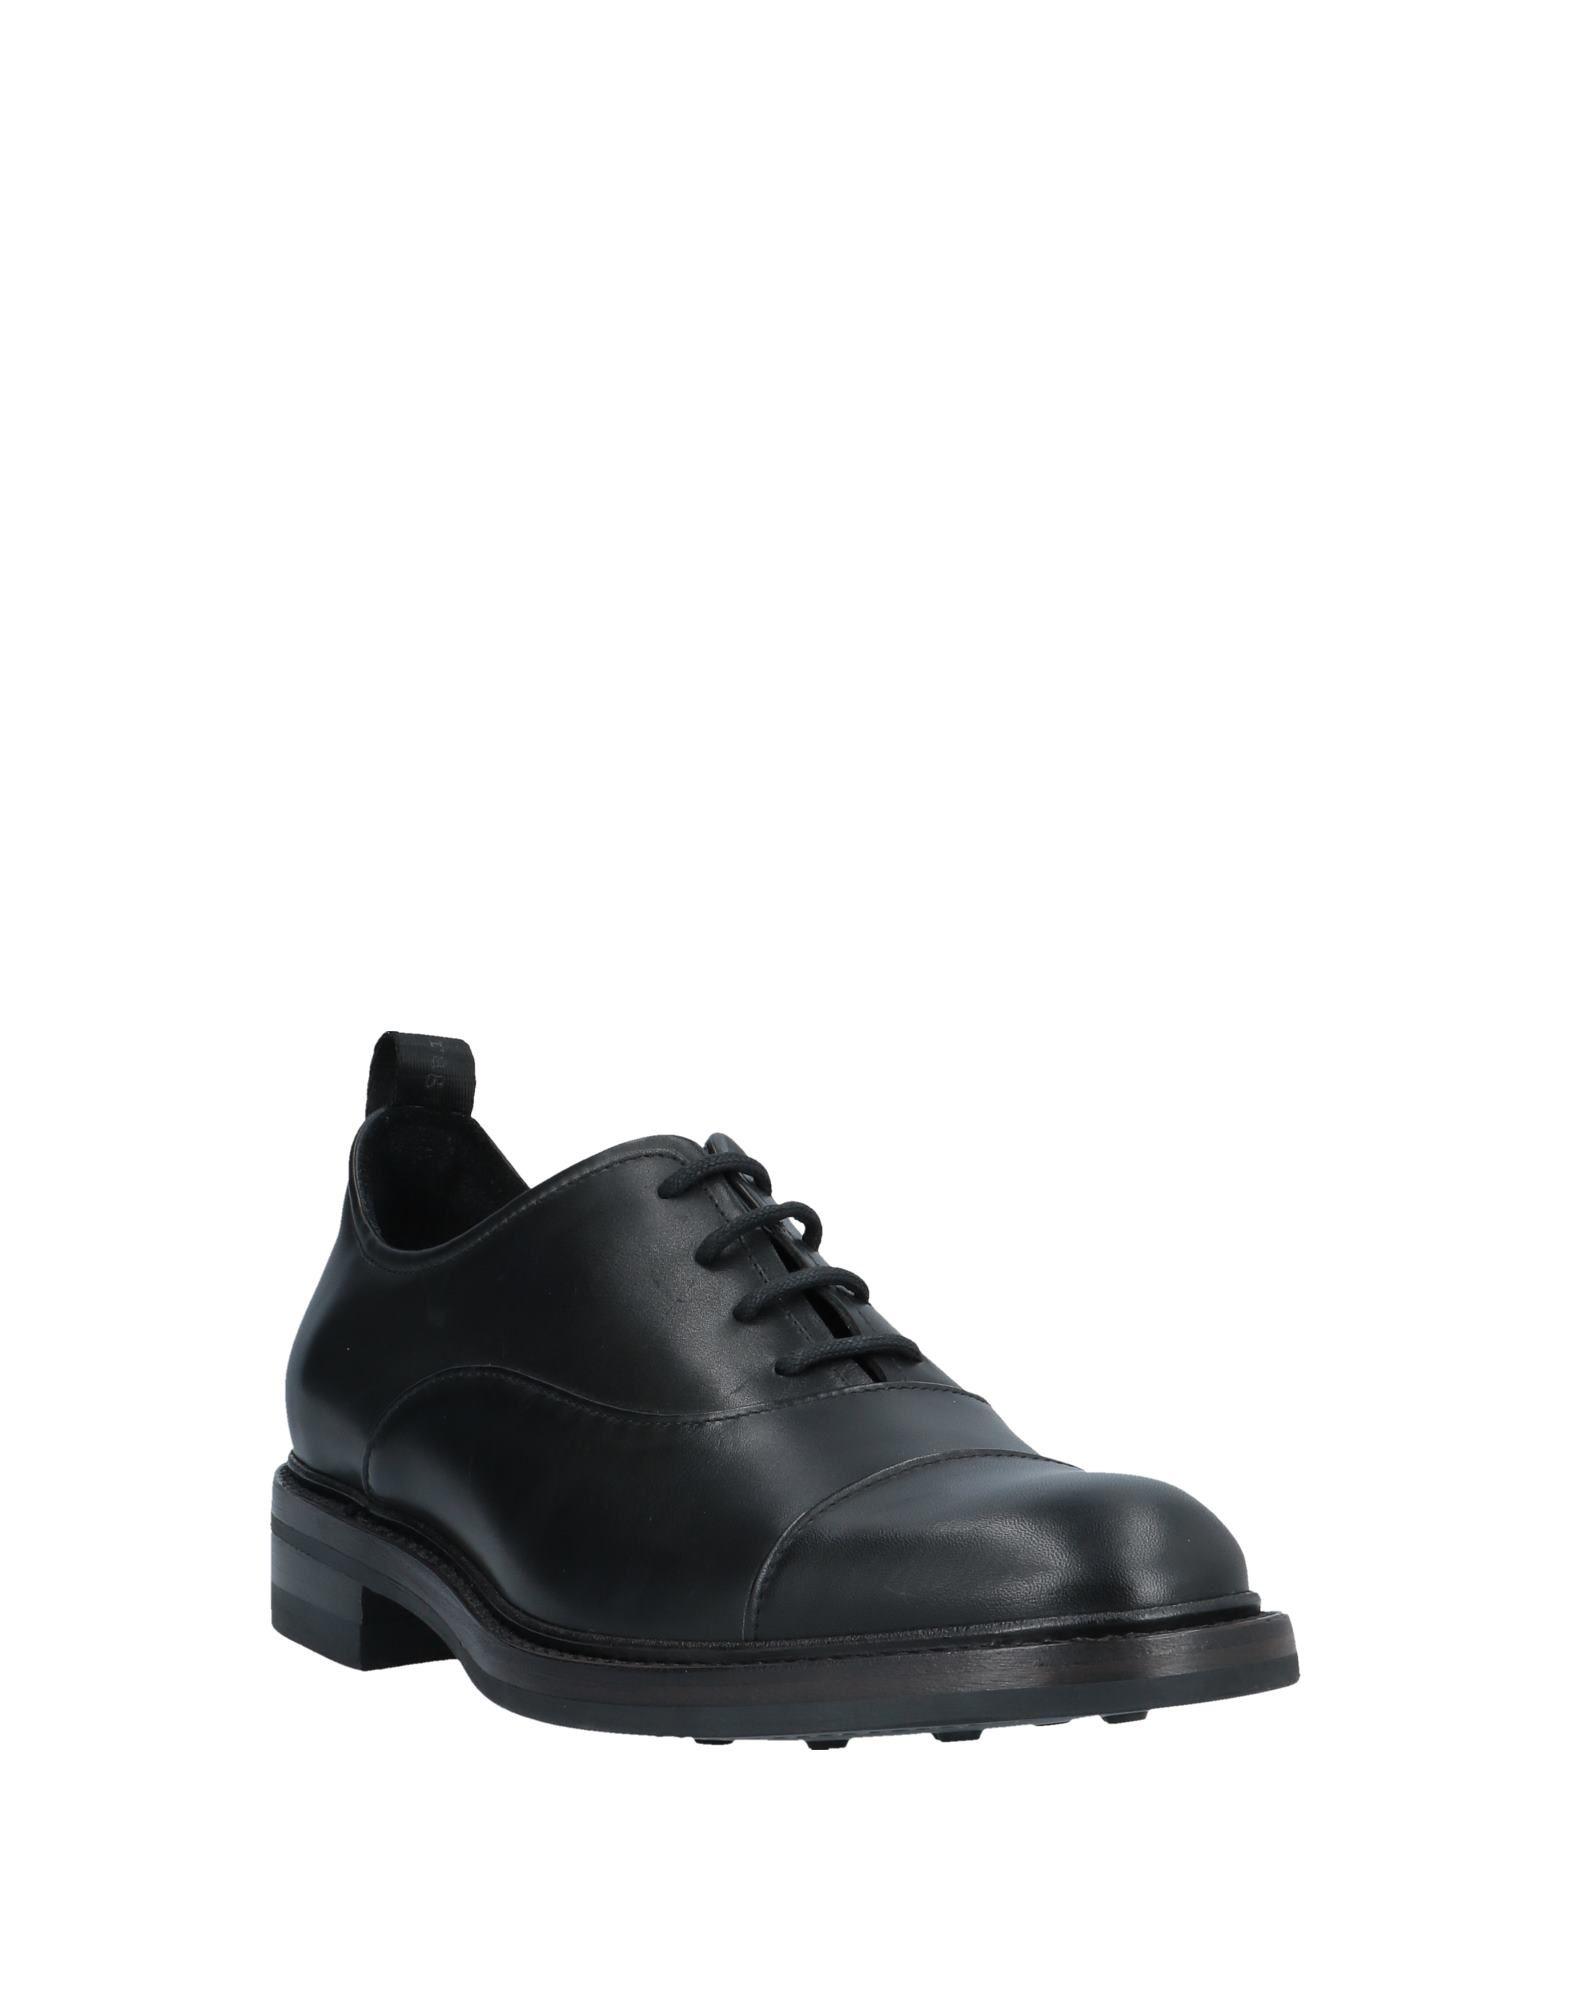 Rag & Bone Leather Lace-up Shoe in Black for Men - Lyst